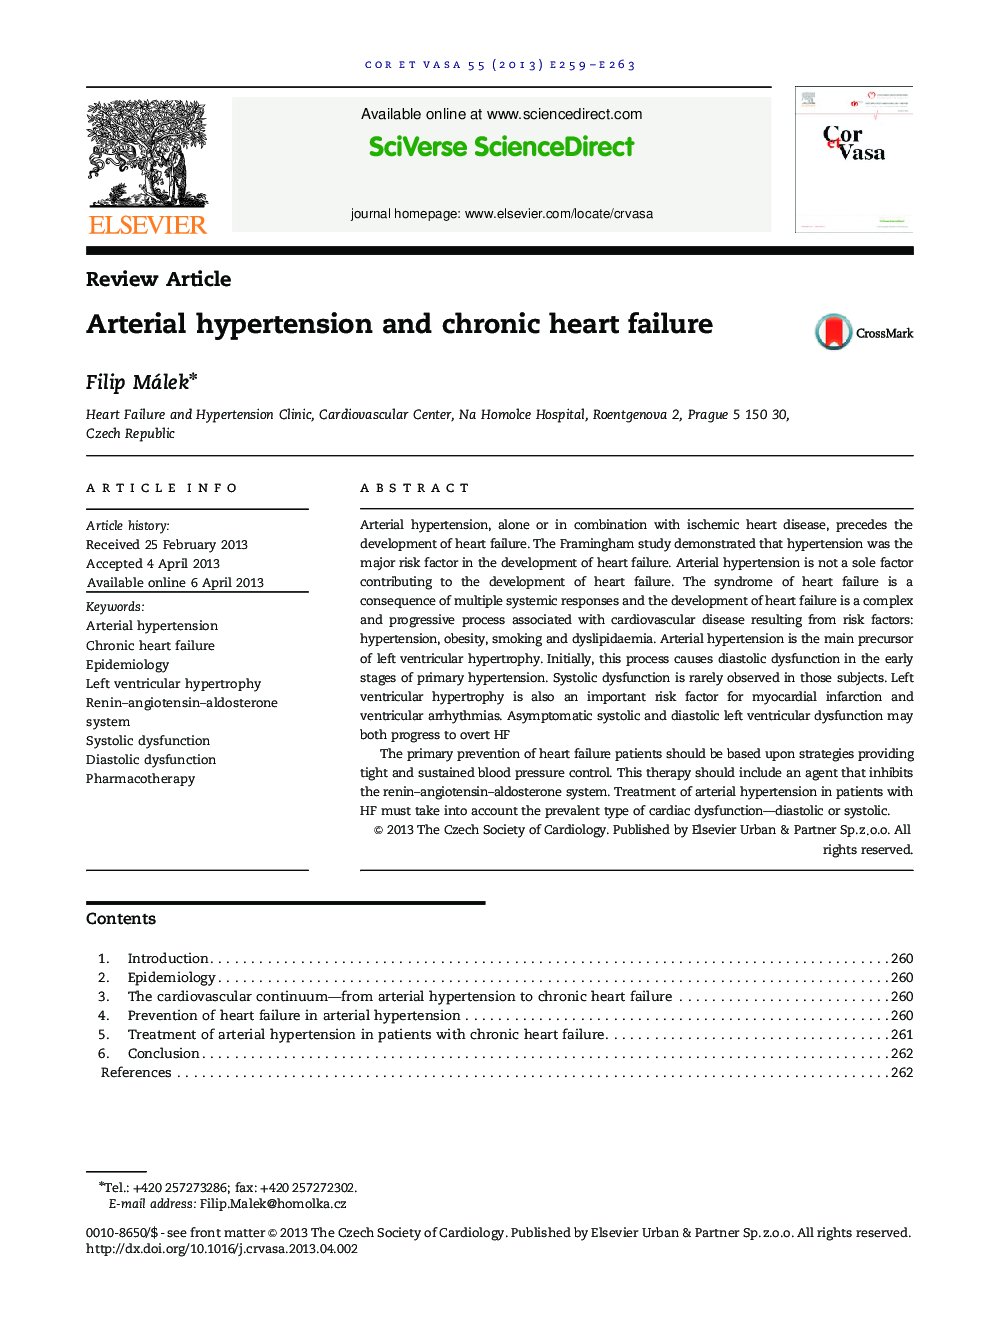 Review ArticleArterial hypertension and chronic heart failure